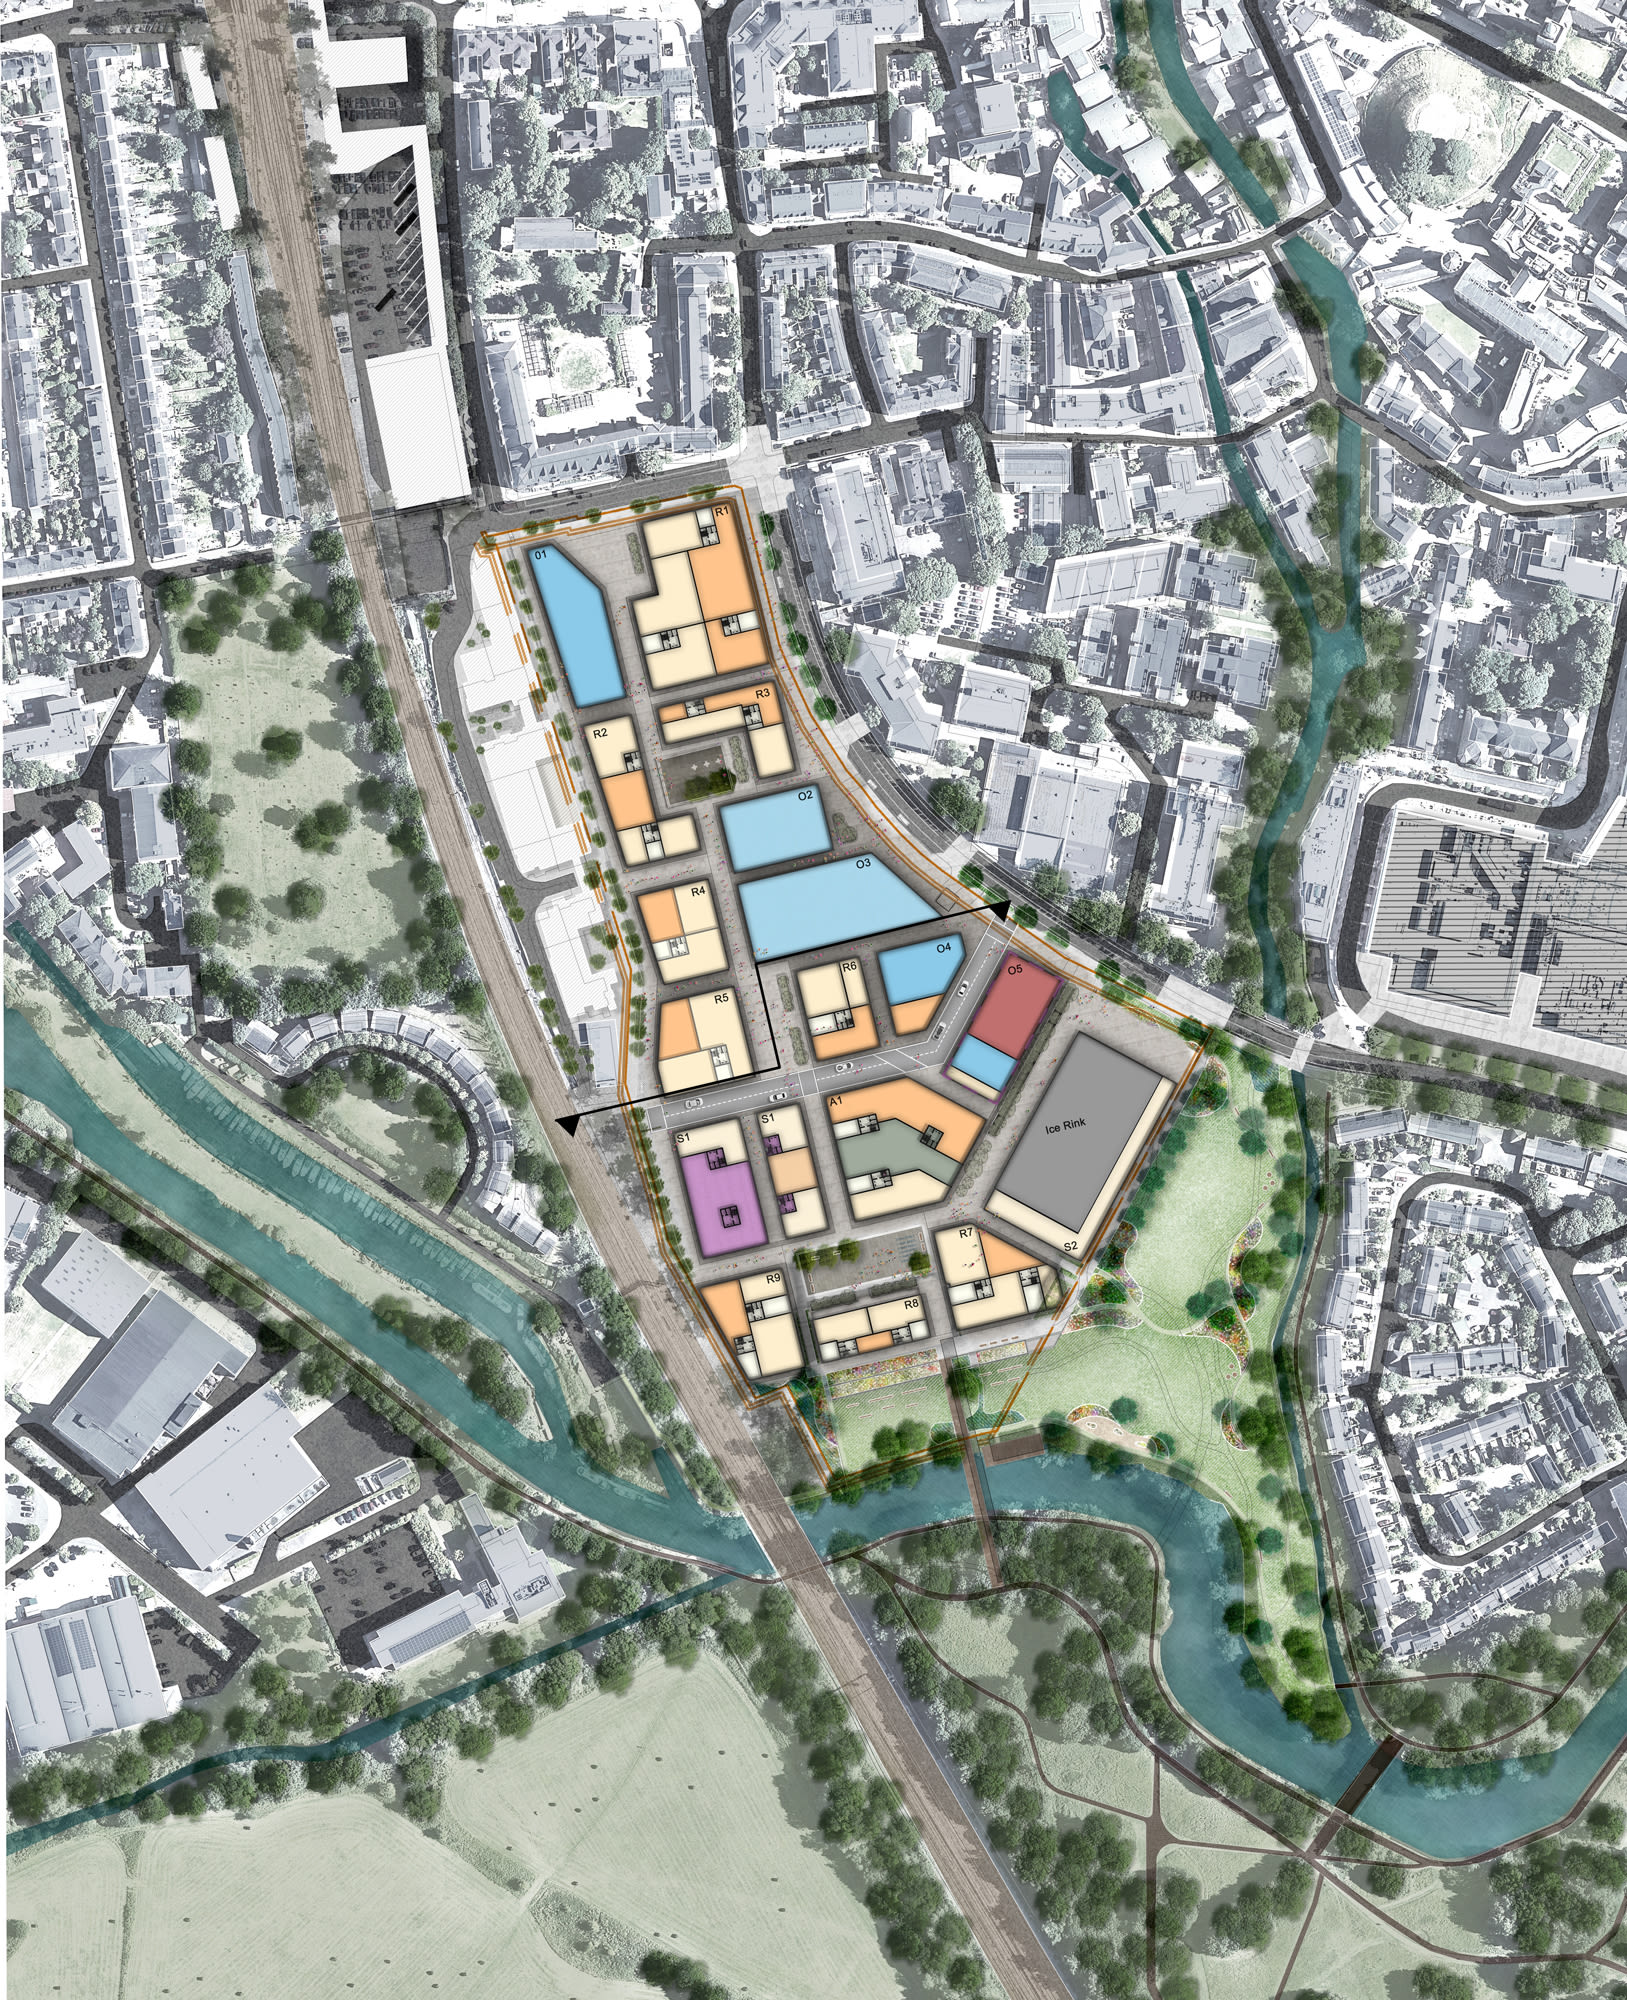 The masterplan exhibits a range of different plot sizes based on two interlocking city grids